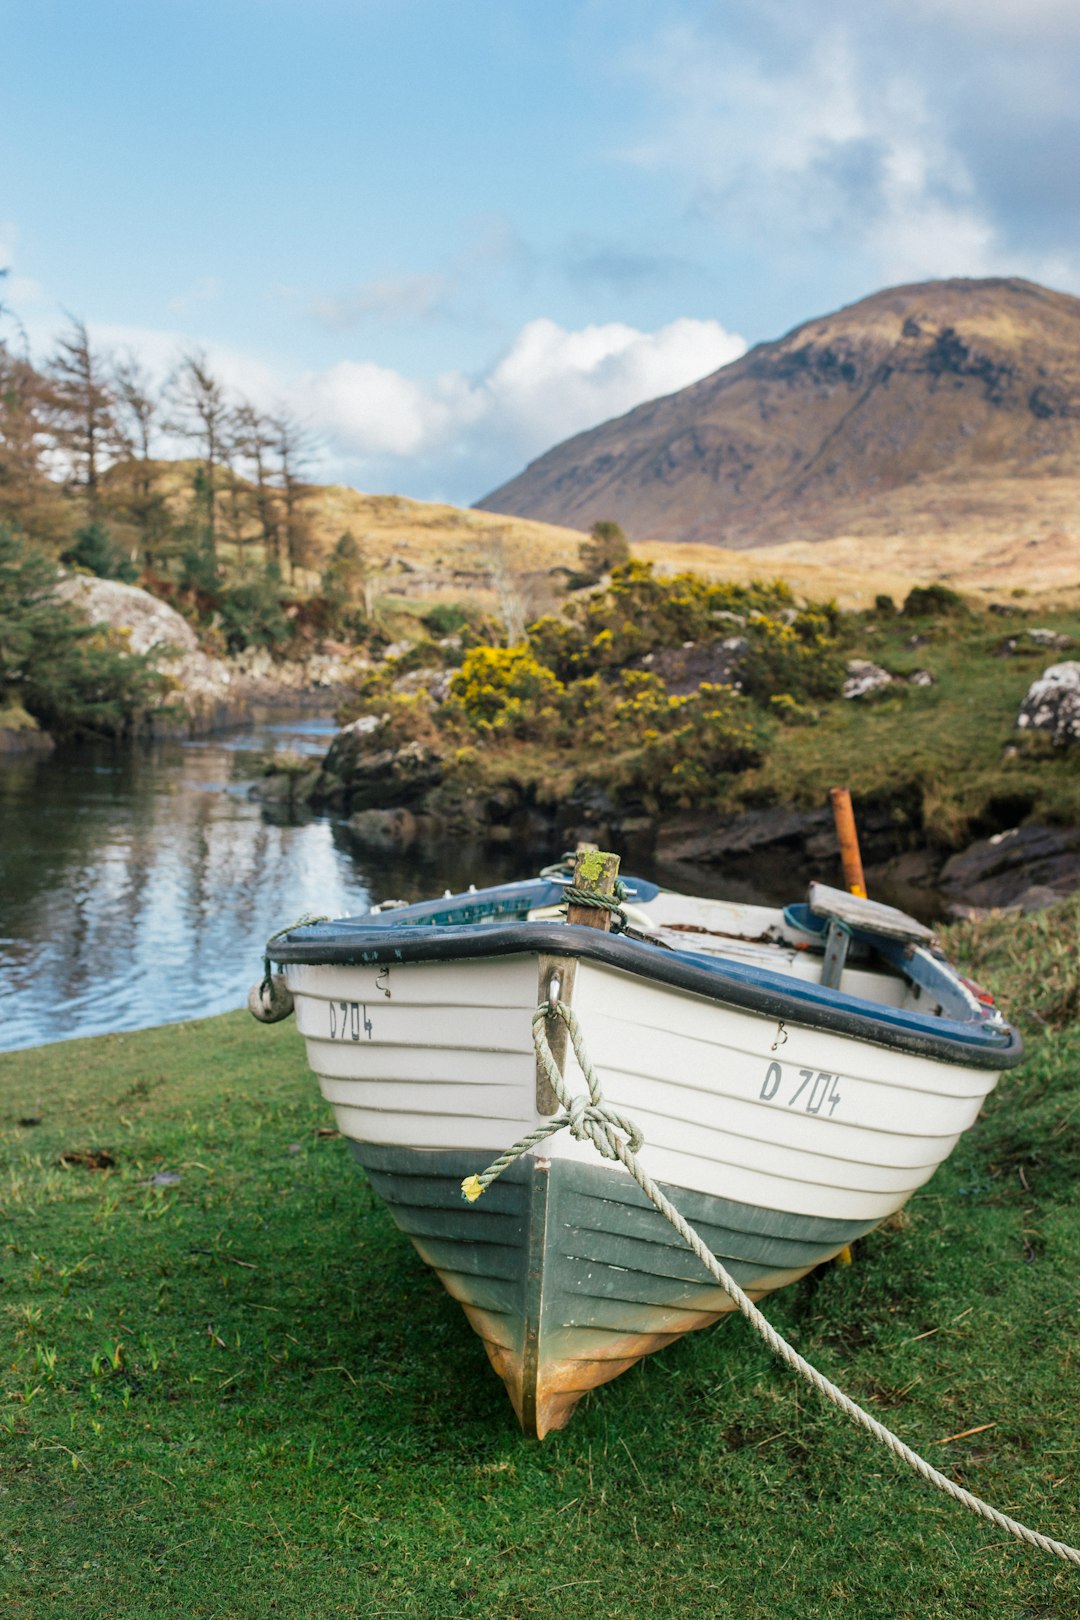 Travel Tips and Stories of Connemara National Park in Ireland